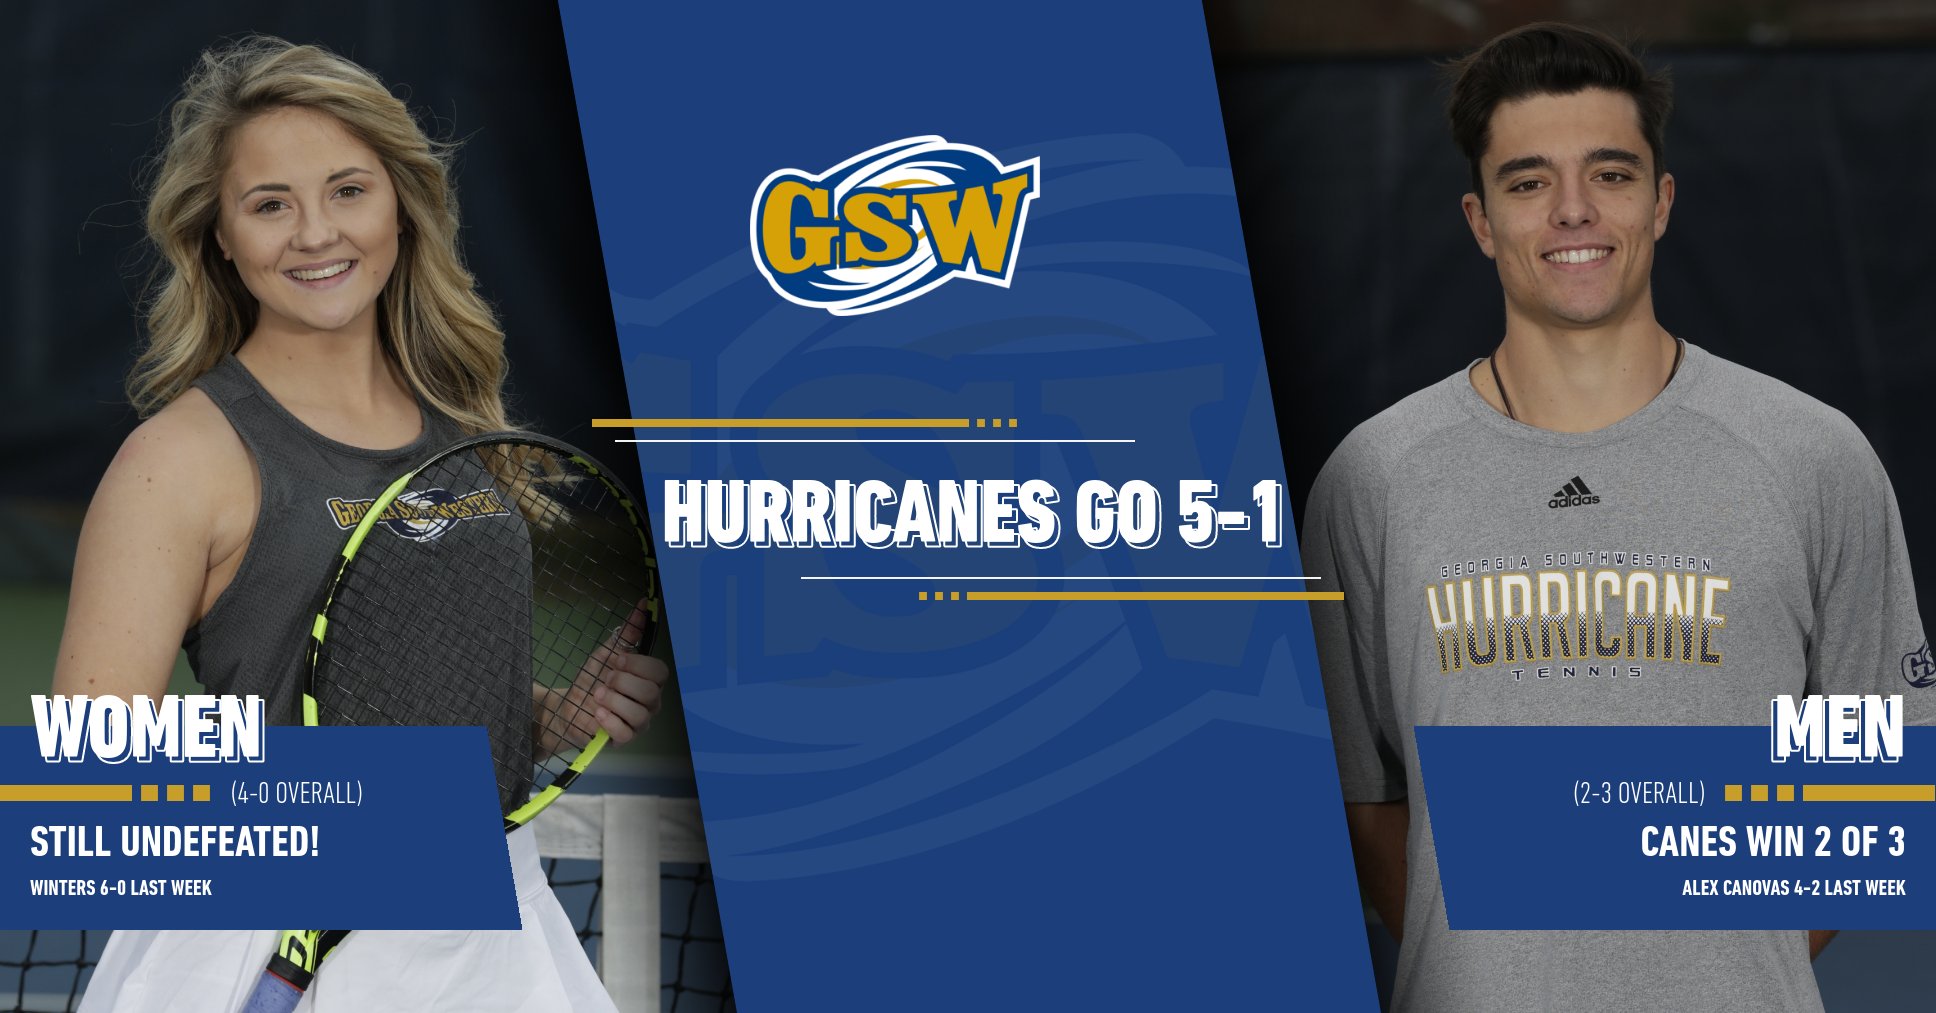 Weekend Recap: Lady Canes Remain Undefeated, Men Win 2 of 3